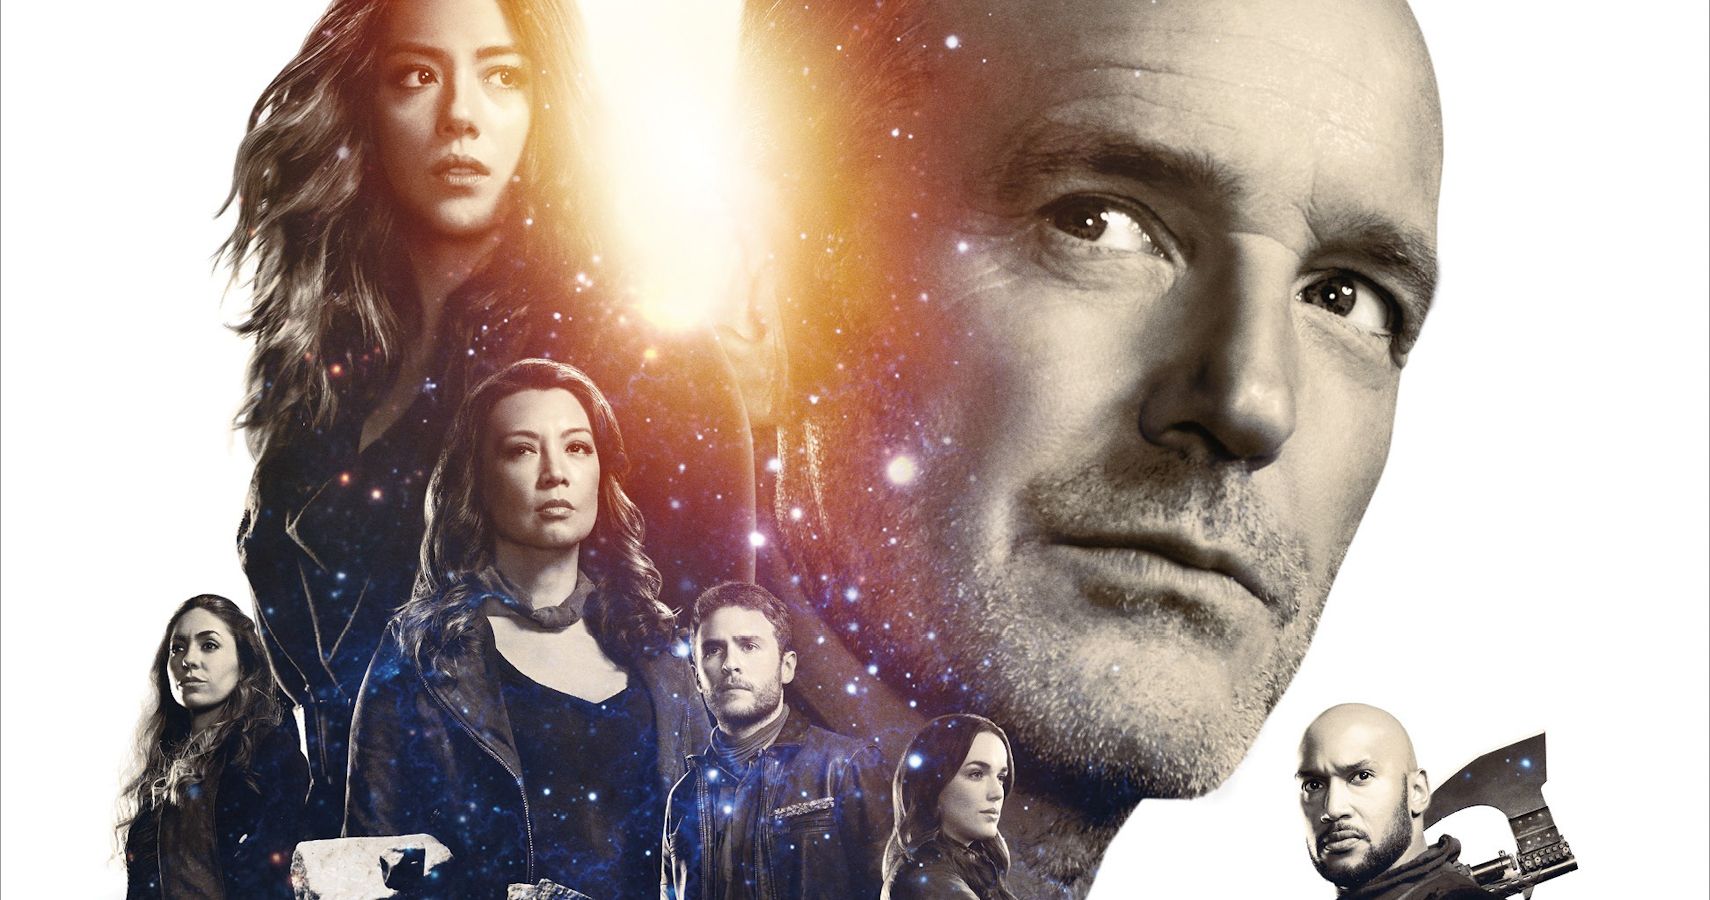 agents of shield season 1 full episodes download